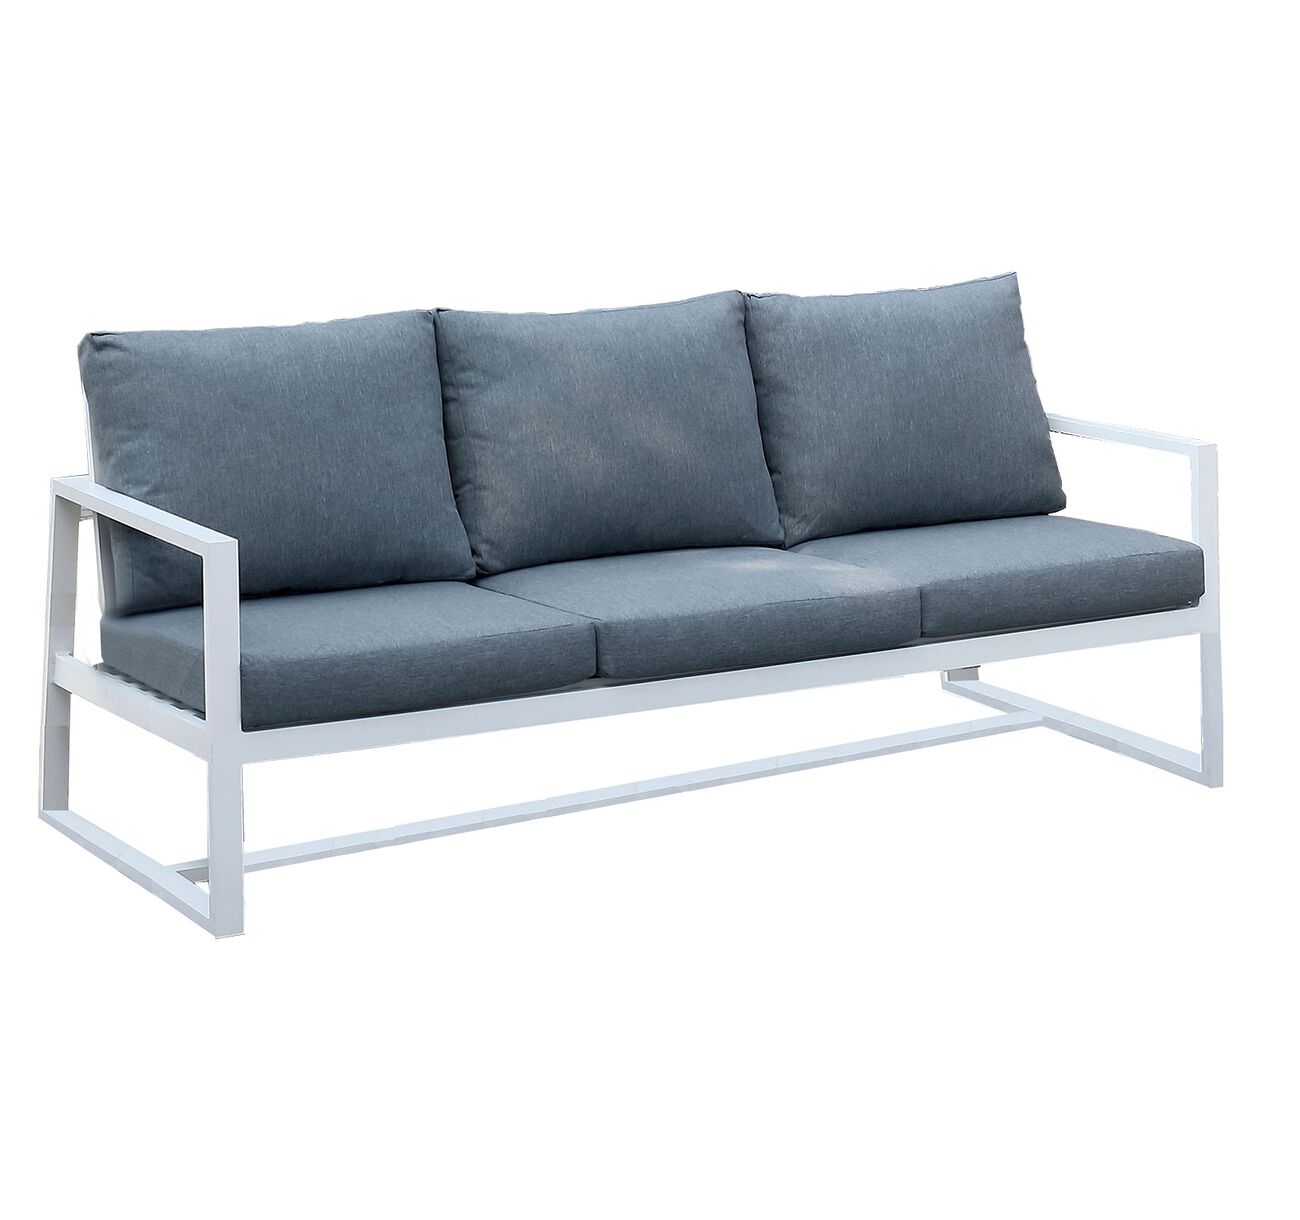 Outdoor Fabric Upholstered Metal Frame Sofa, White and Gray